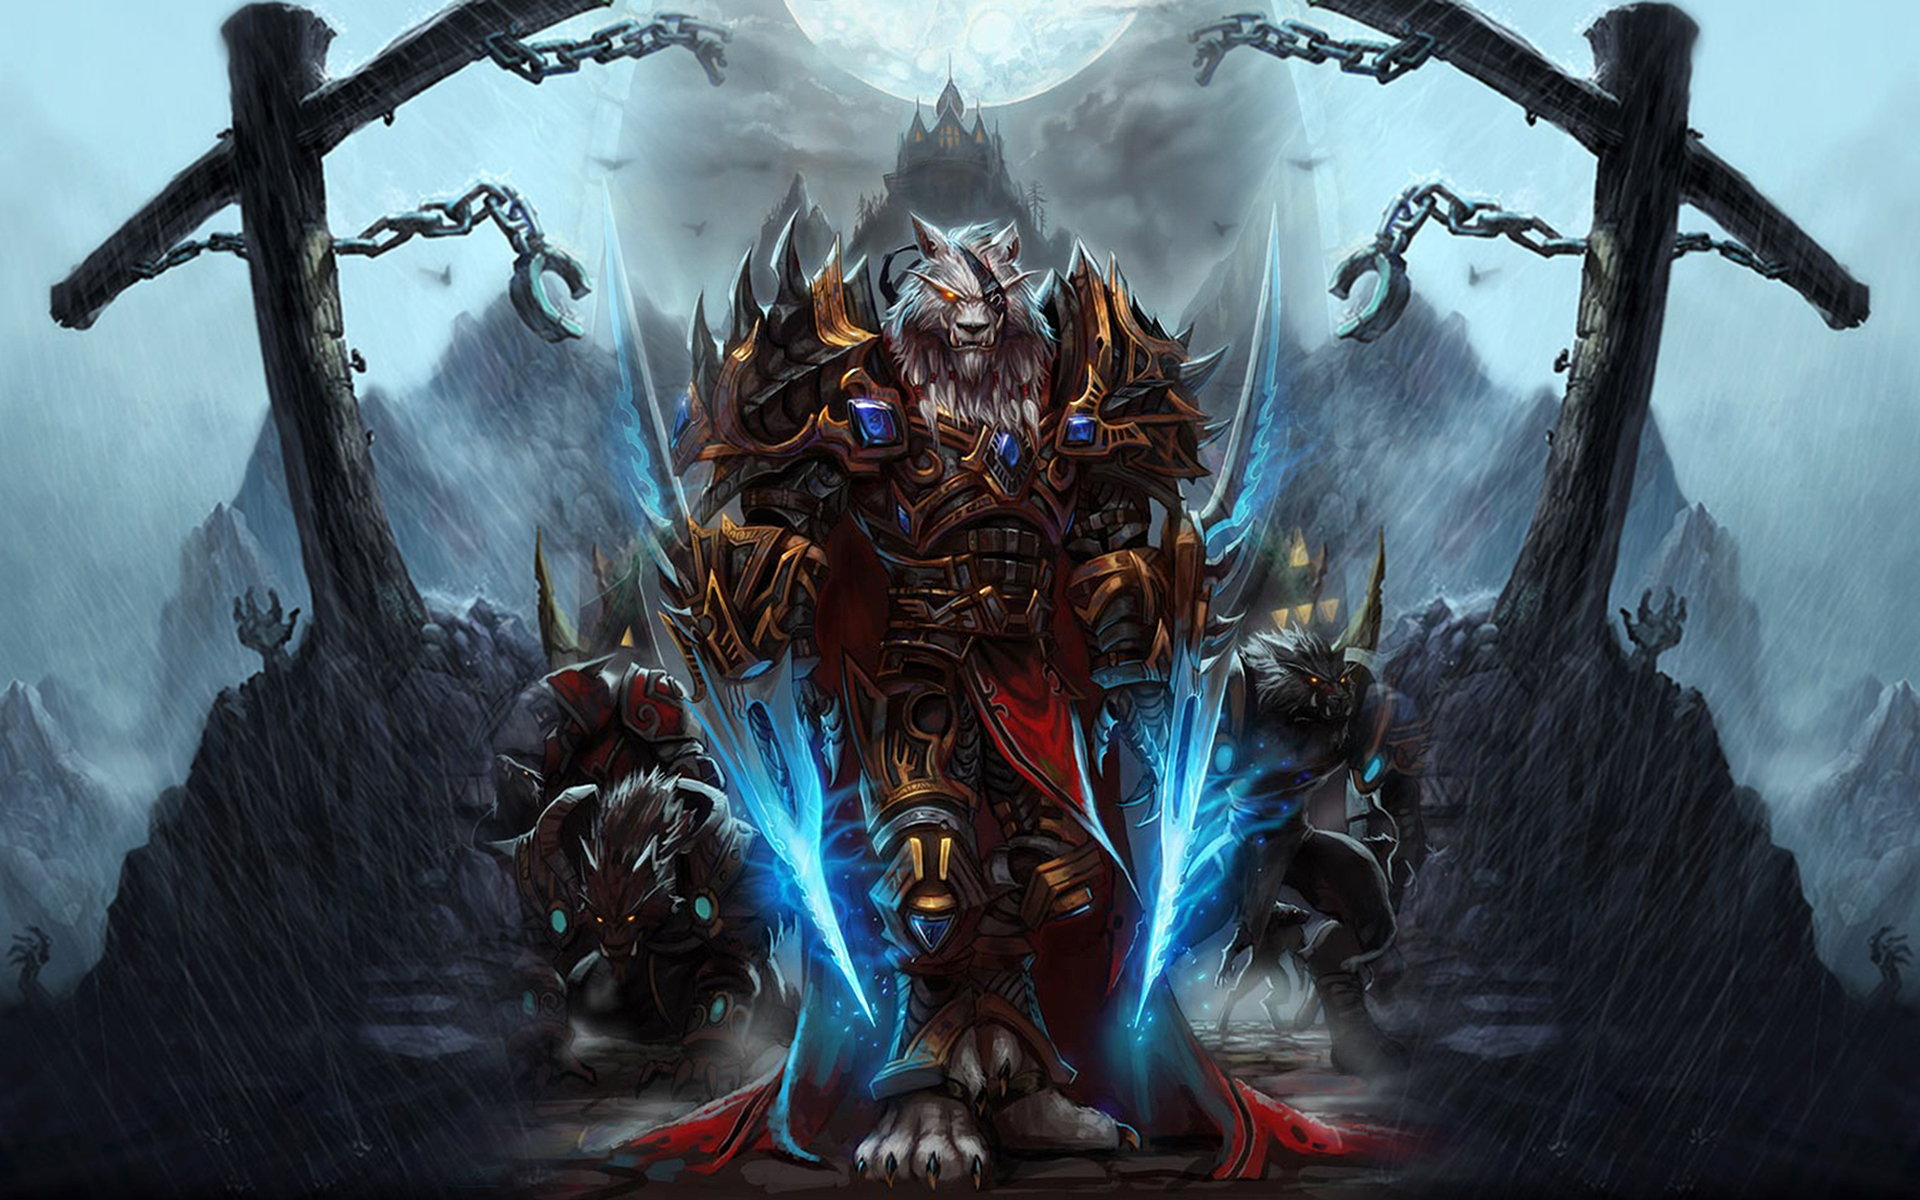 Animated Wallpaper  on World Of Warcraft Worgen Hd Wallpaper   Games   889192